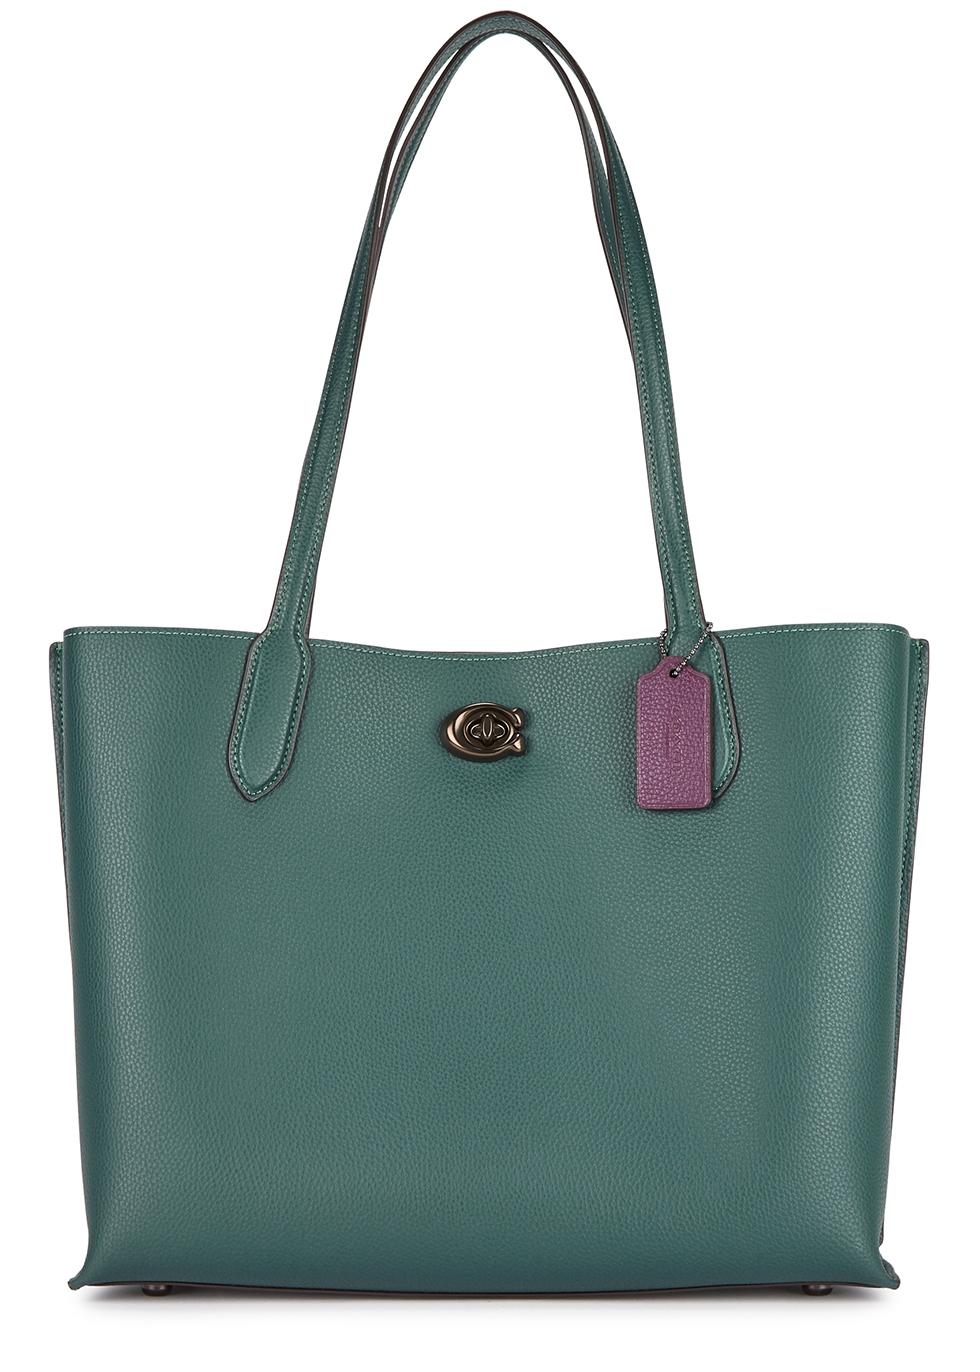 COACH Willow Dark Teal Grained Leather Tote in Dark Green (Green) - Lyst